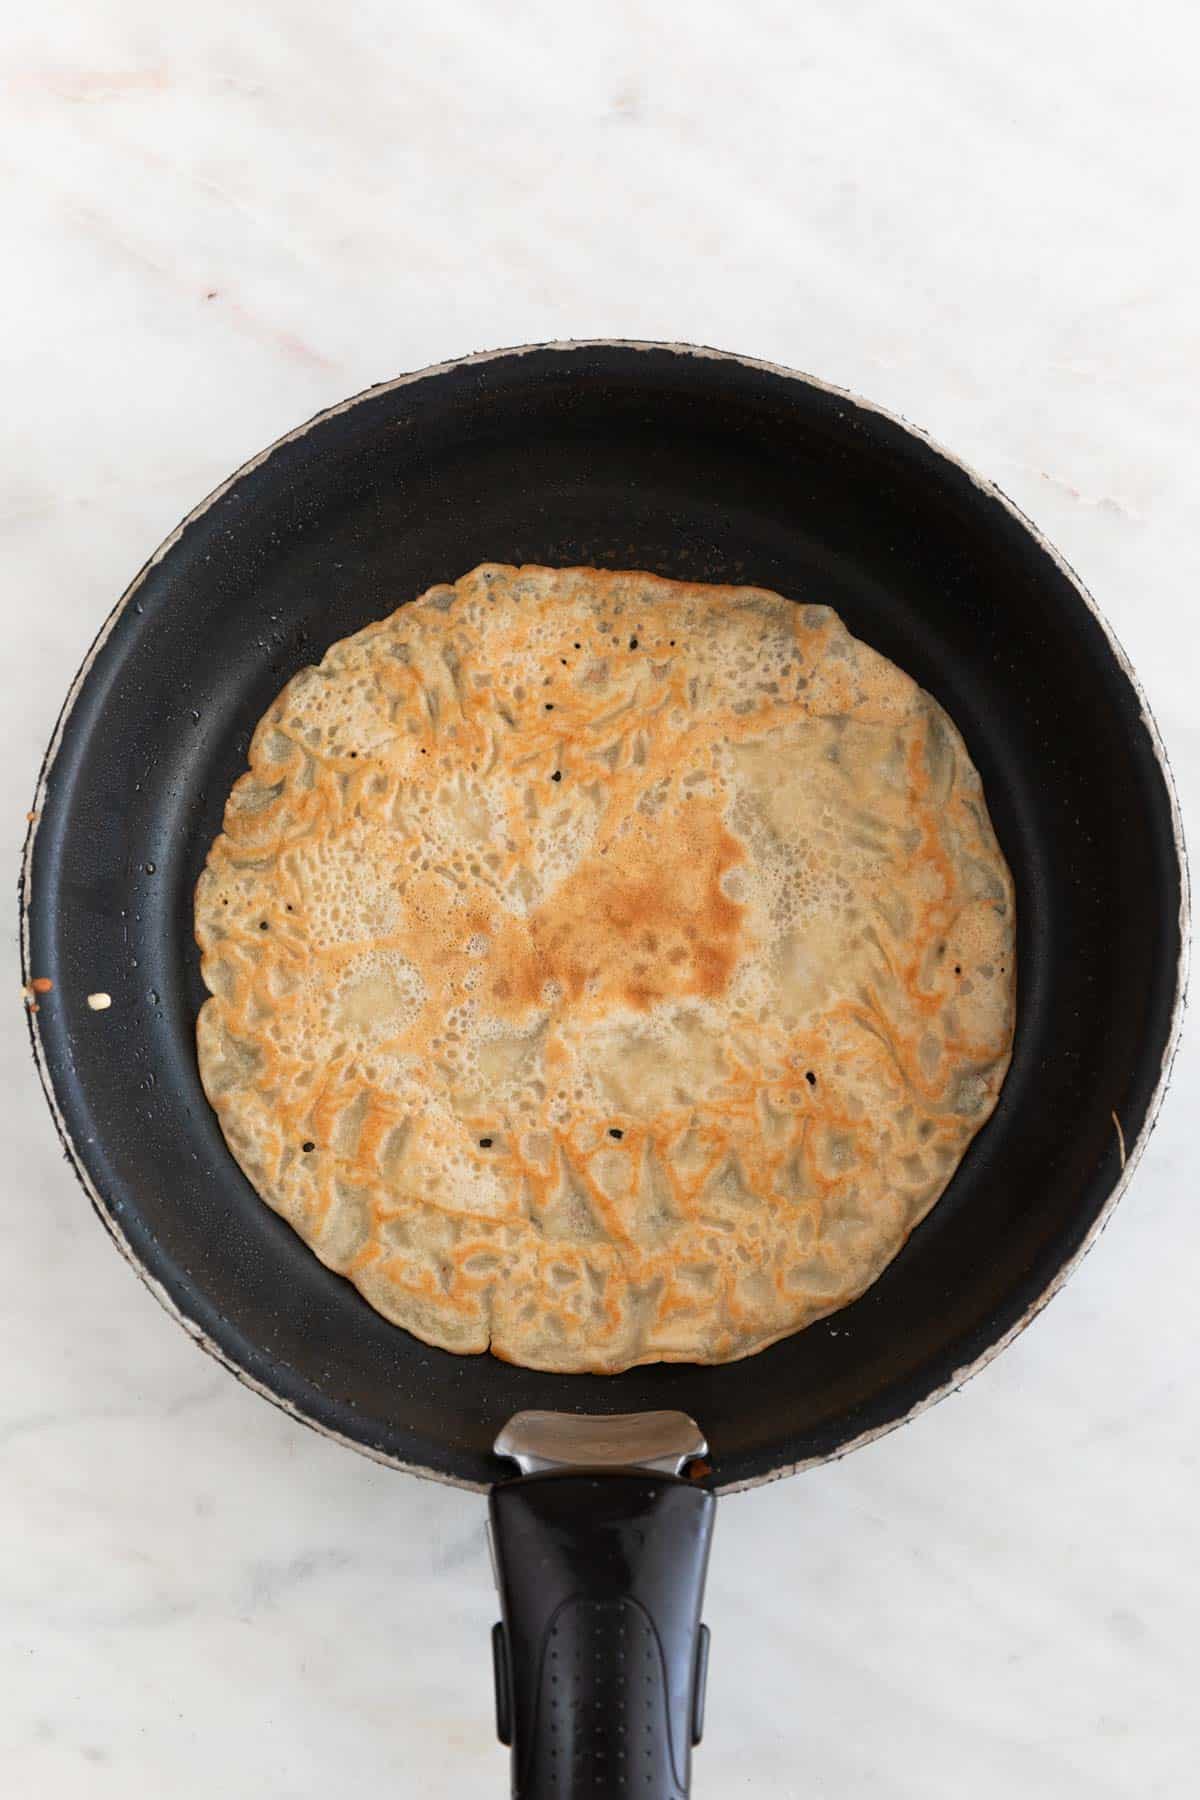 A skillet with a crepe cooked for both sides.